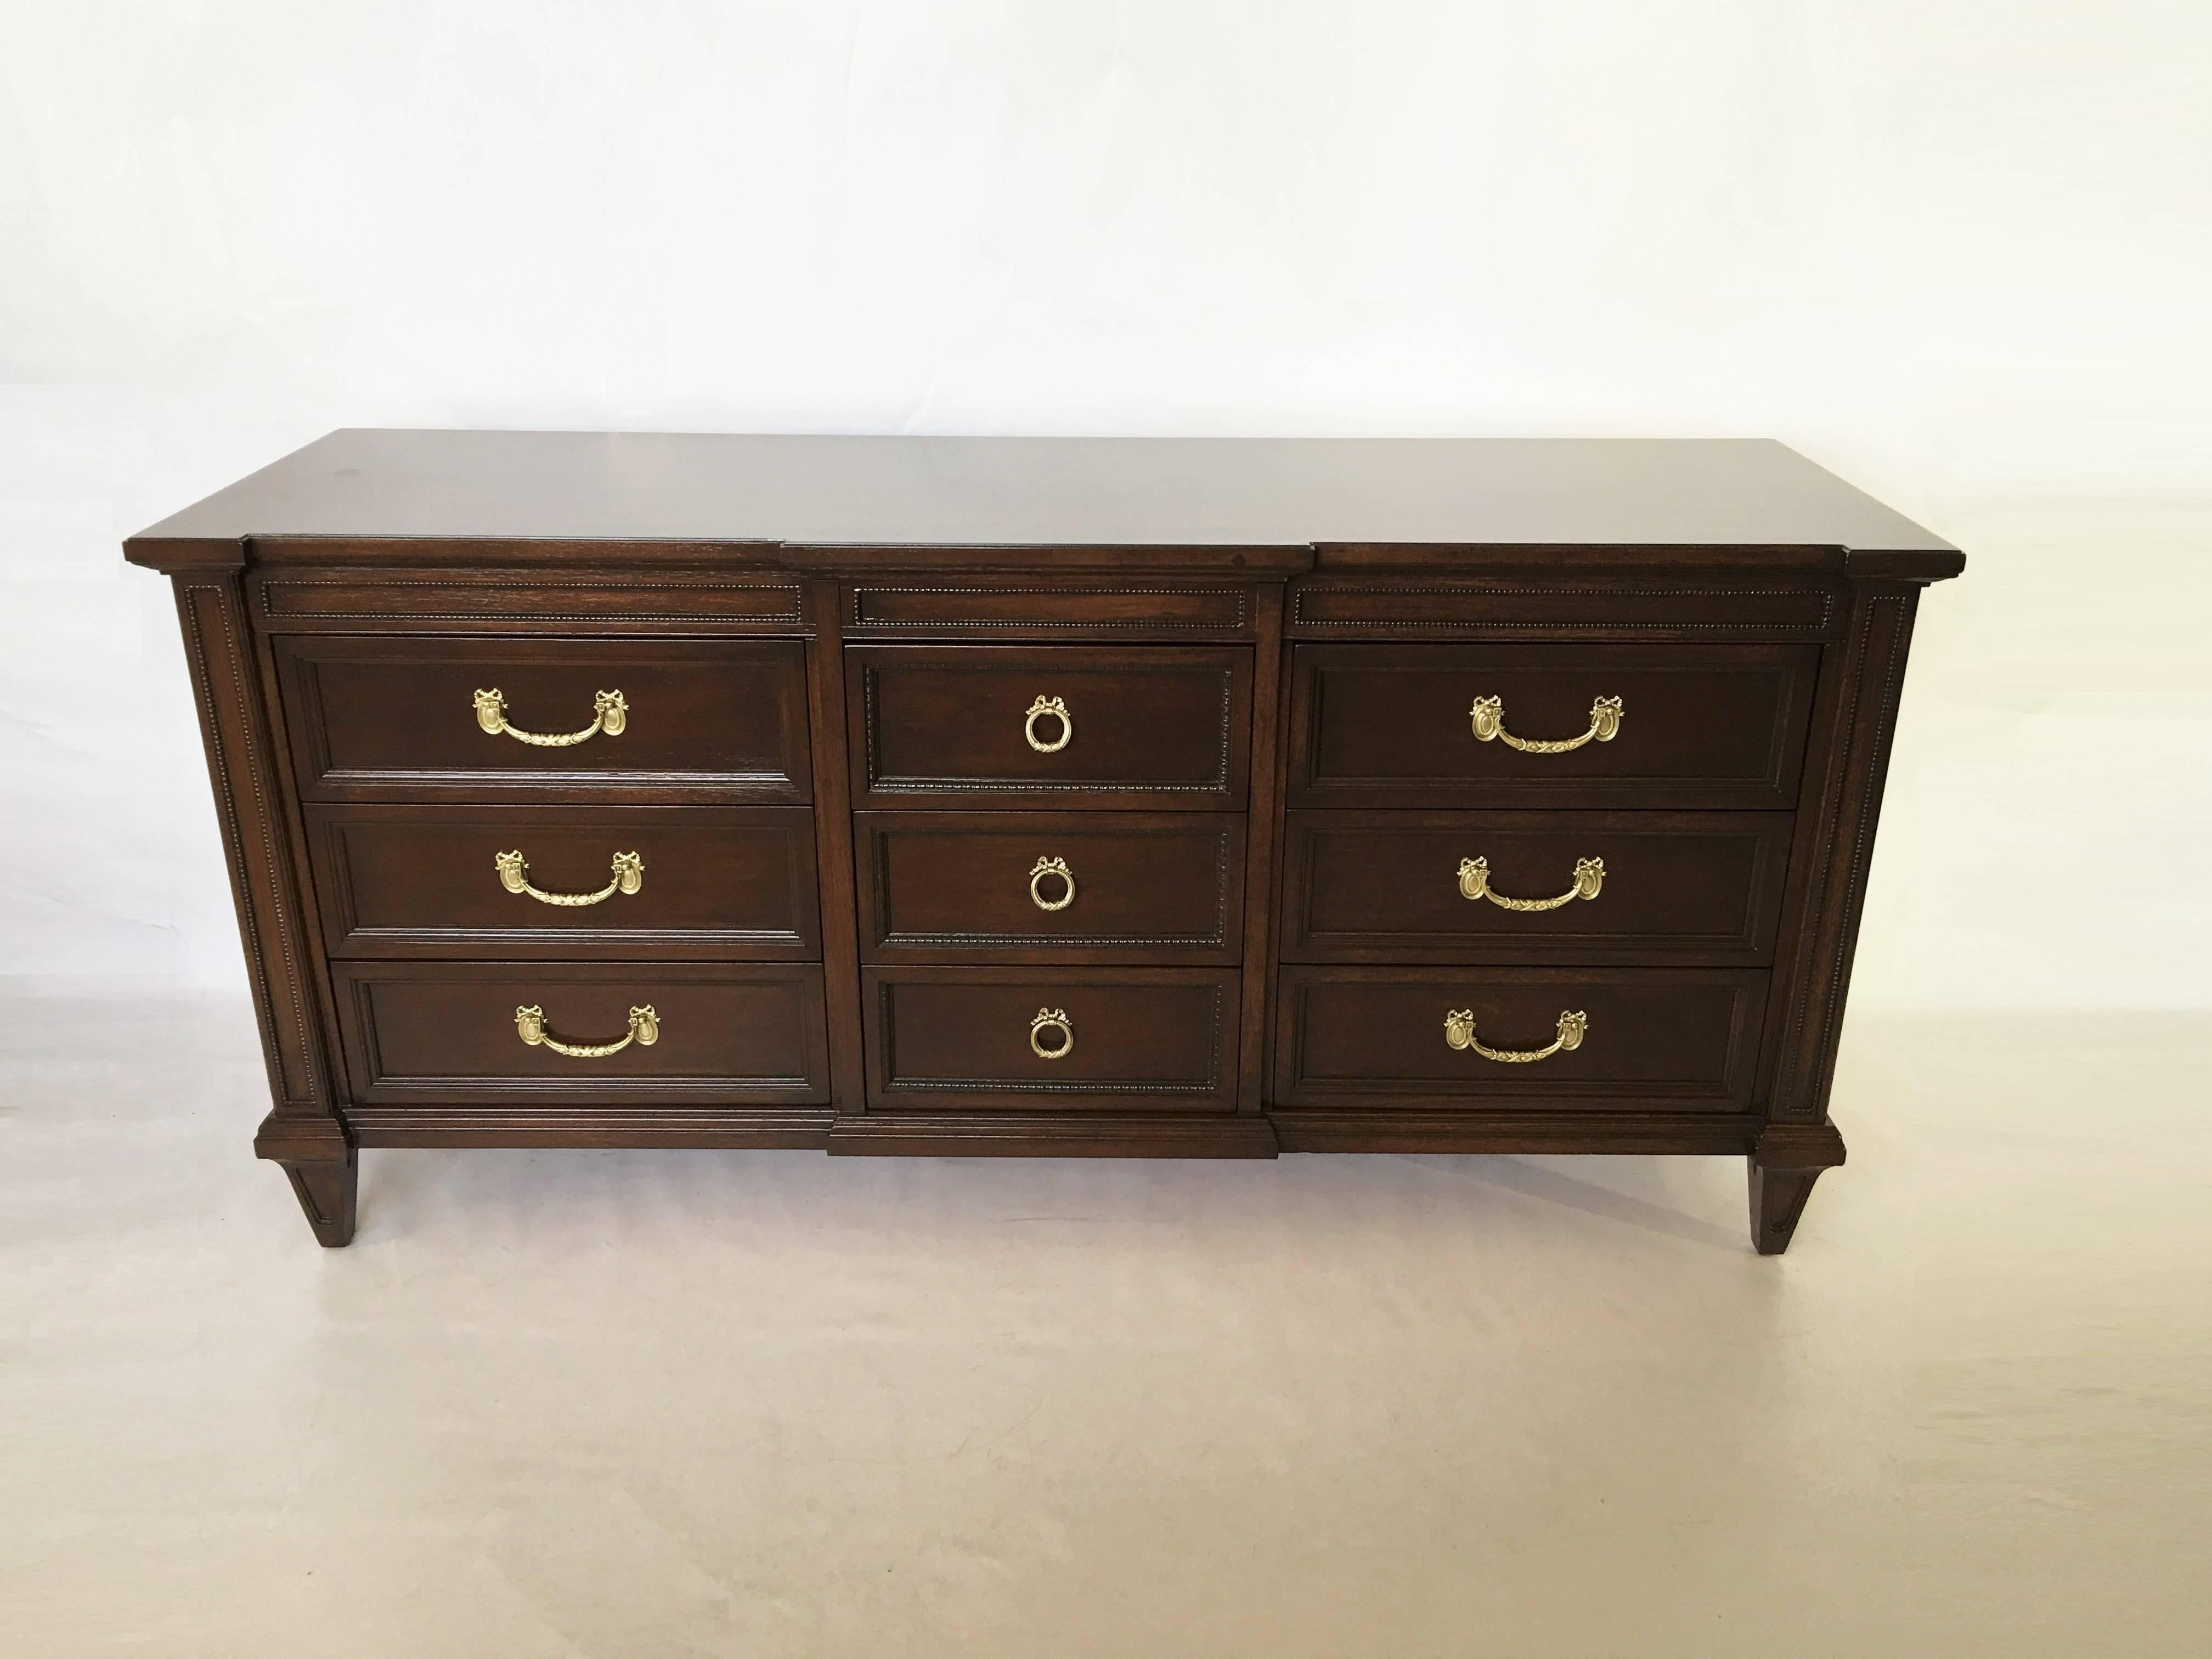 Gorgeous low dresser by Henredon in the French Regency style. Nicely proportioned the dresser: rectangular form with banded top over a case consisting of three drawers in the center with three drawers flanking each side, standing on spade style